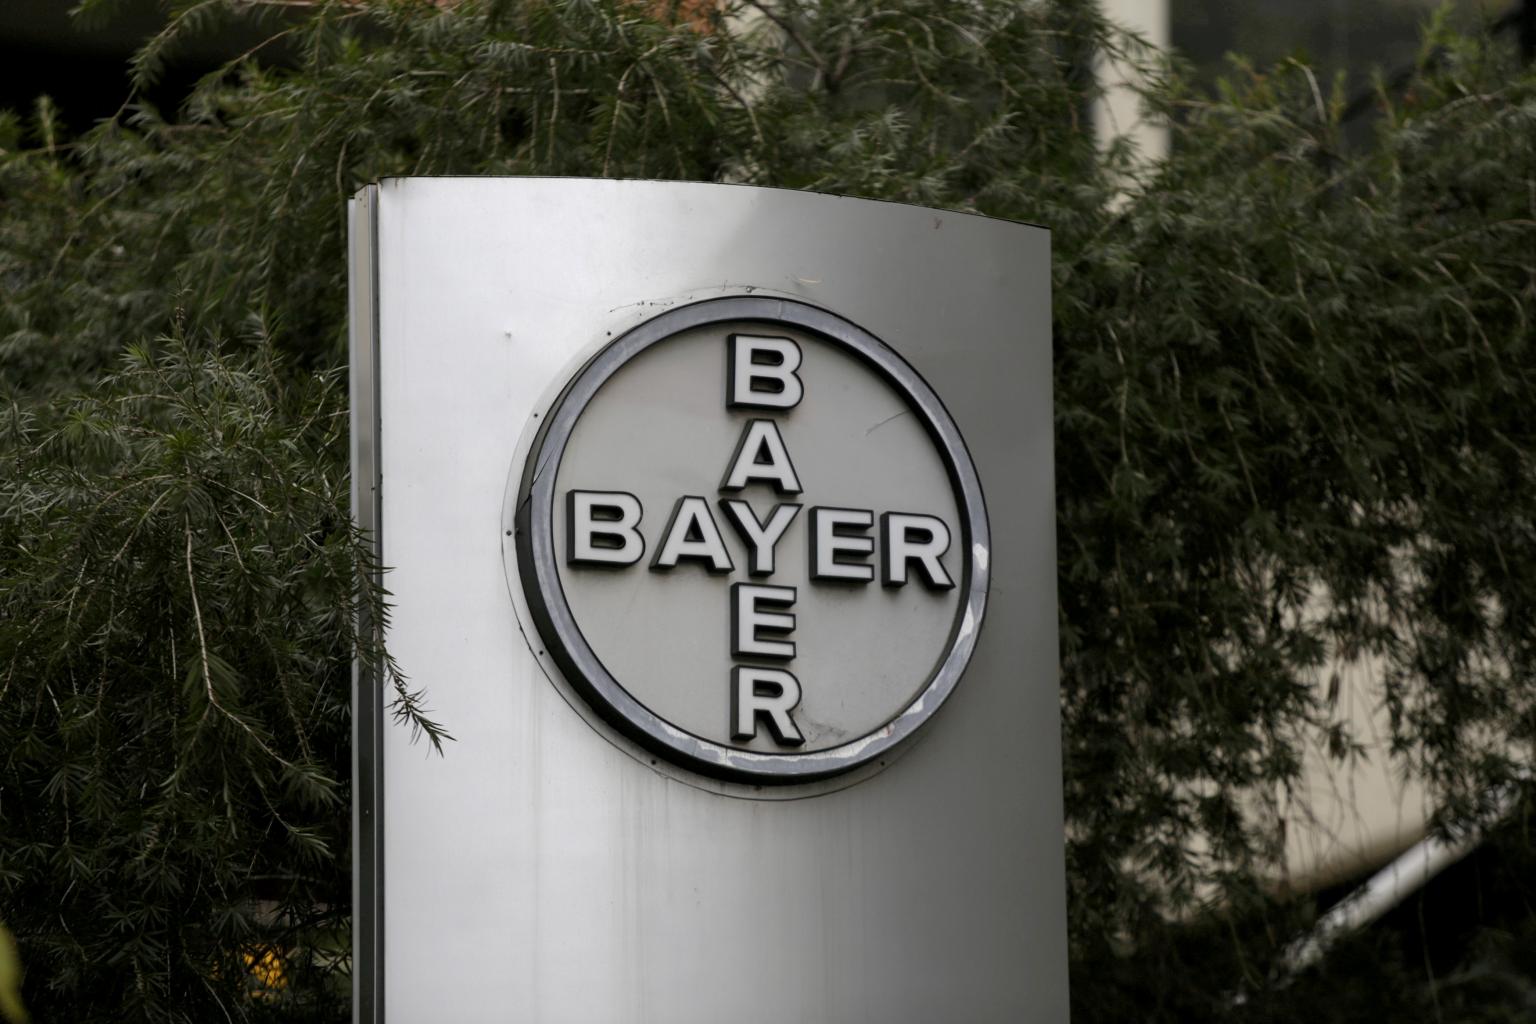 Bayer wins U.S. nod for Monsanto deal to create agriculture giant